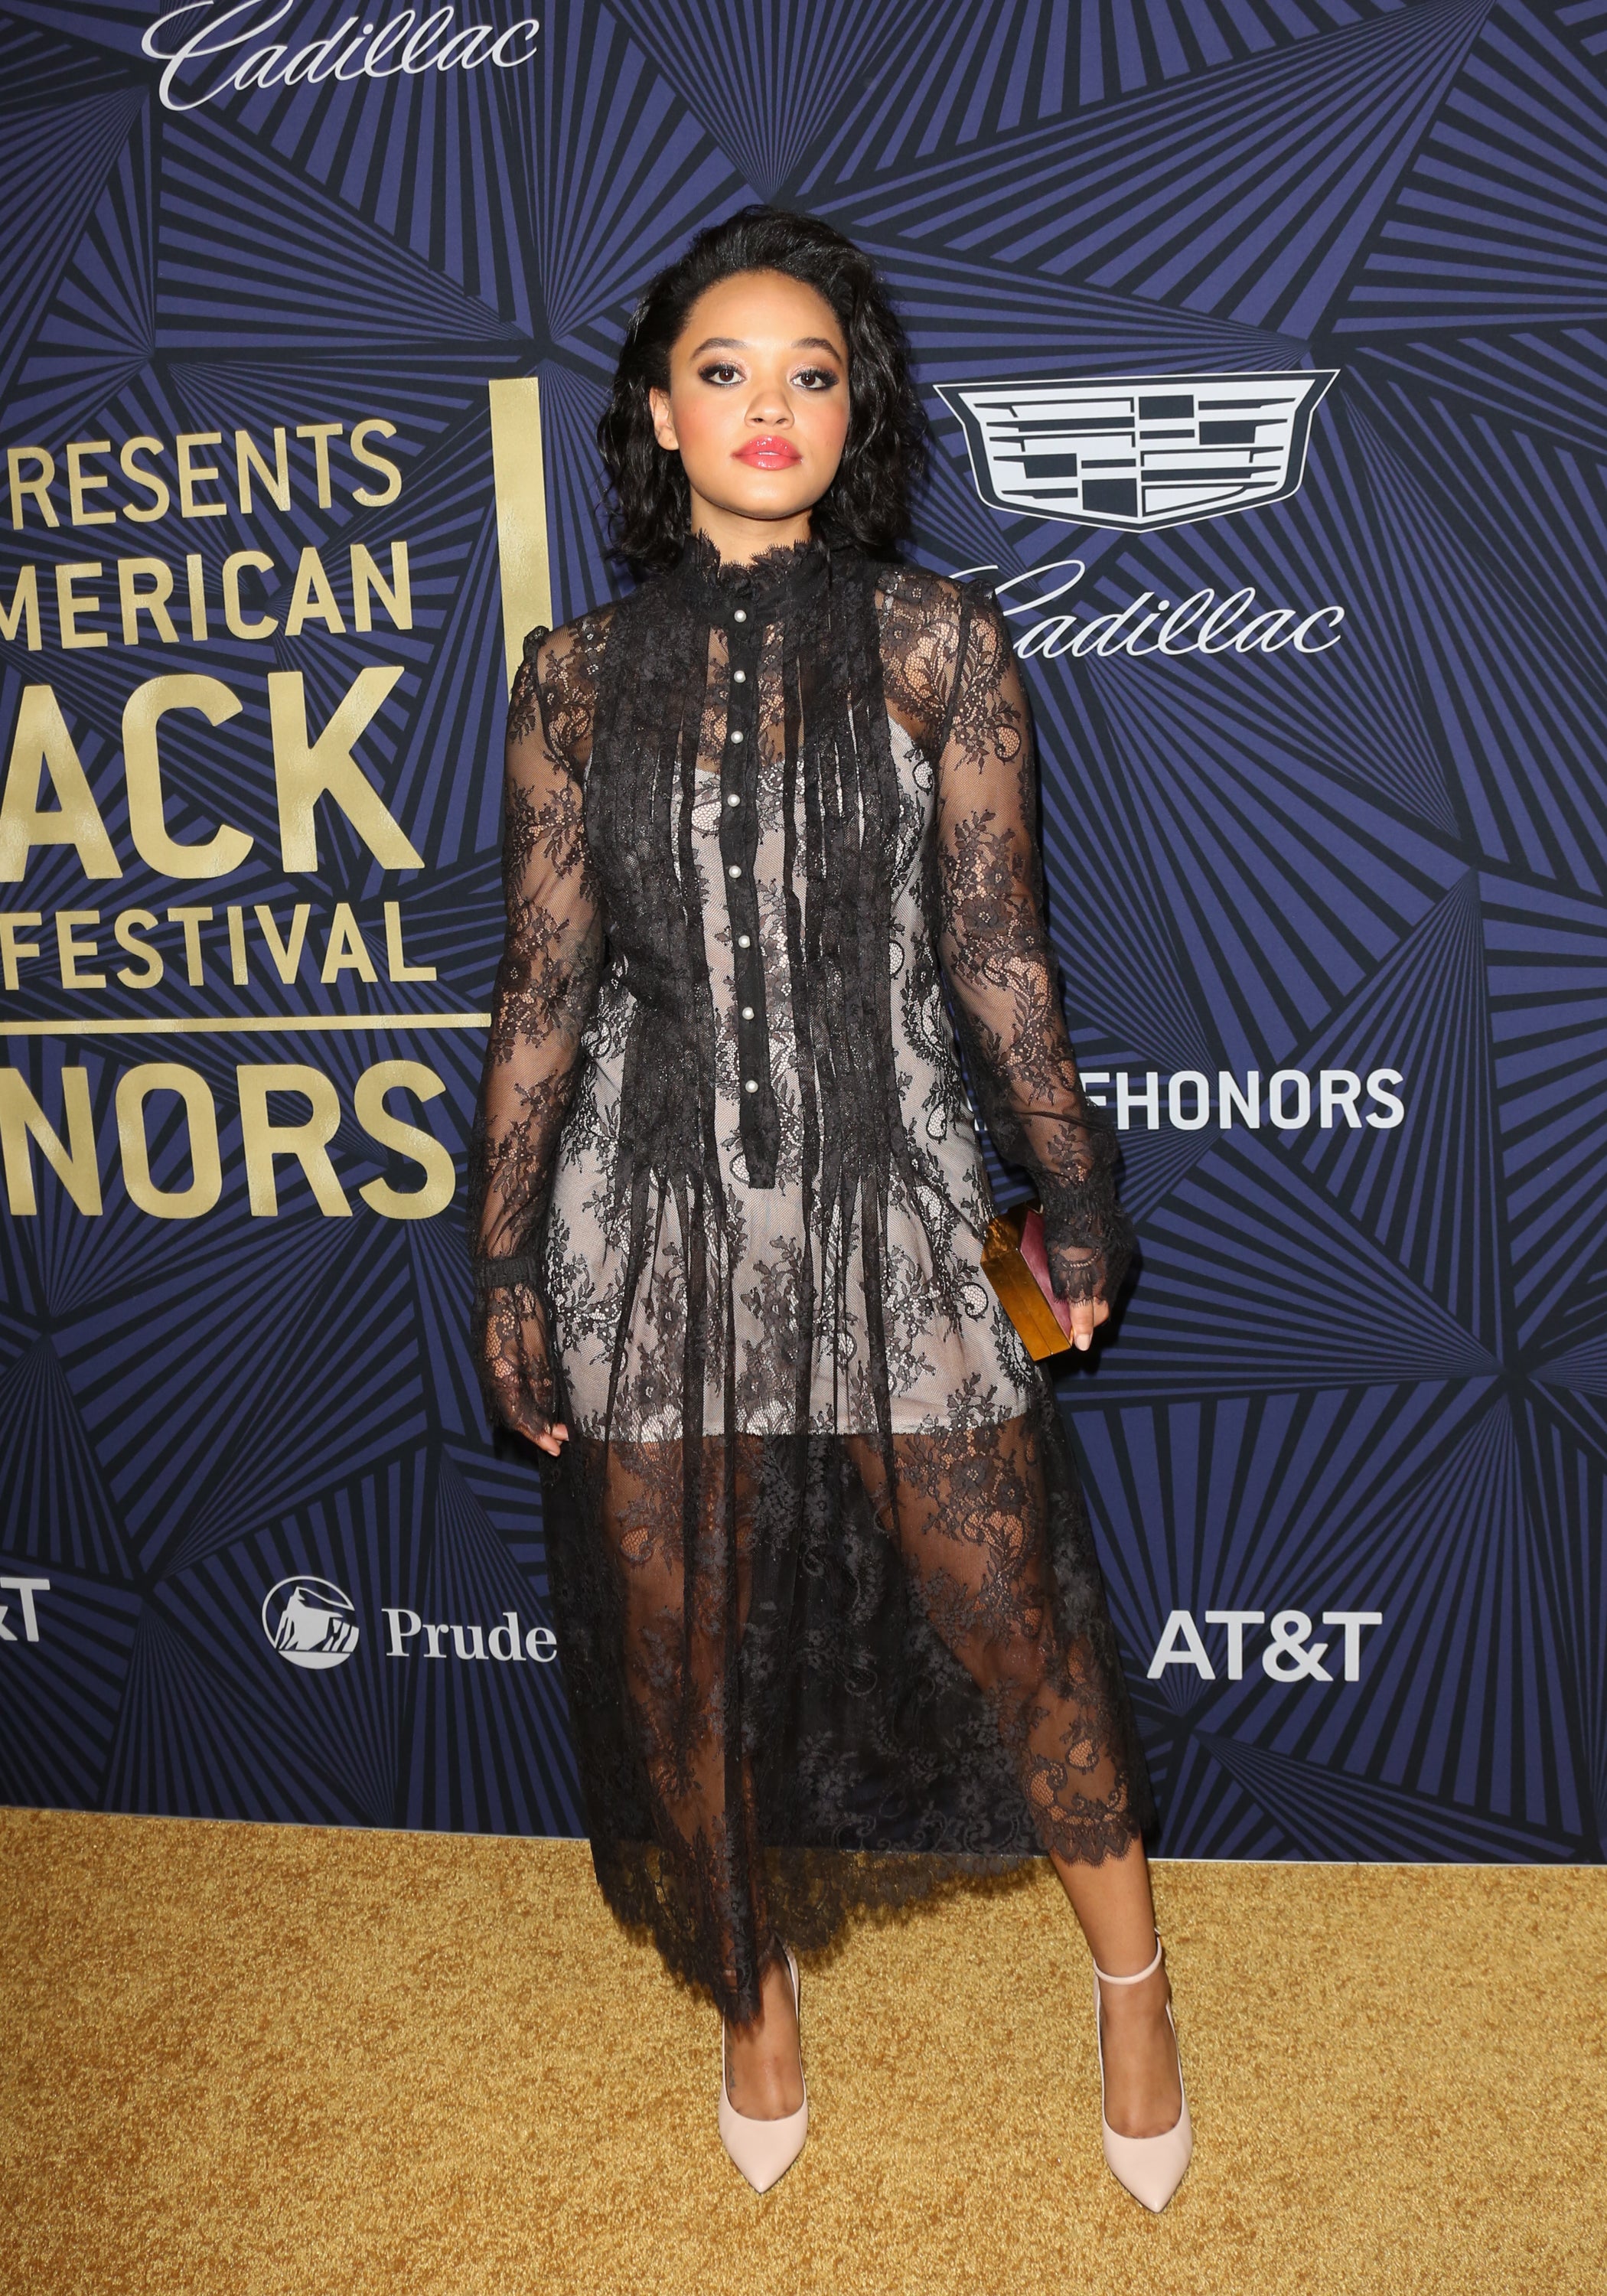 BET's American Black Film Festival Honors Red Carpet Was On Fire
